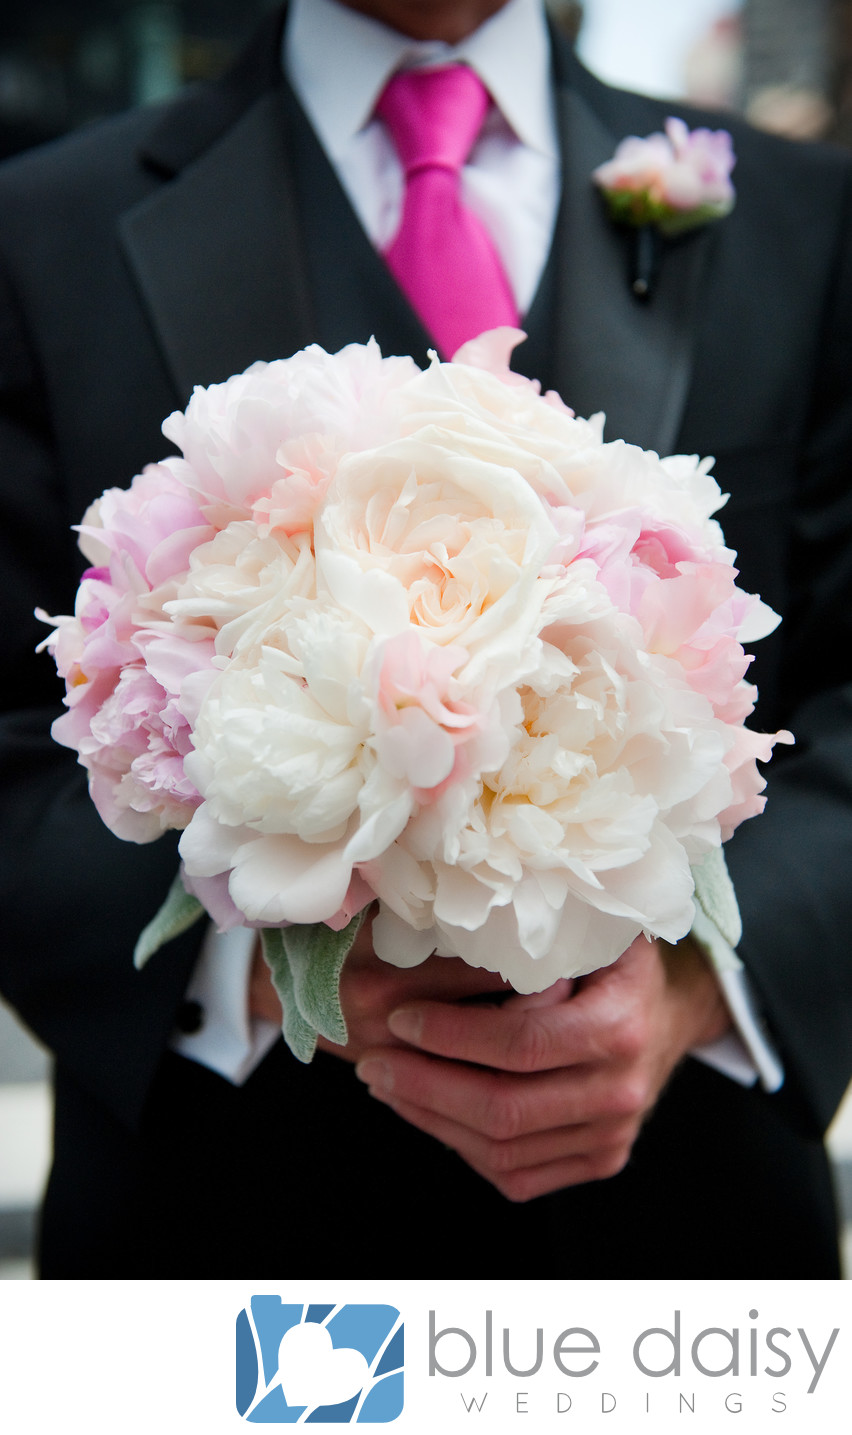 Groom holding white pink peony bridal flower bouquet